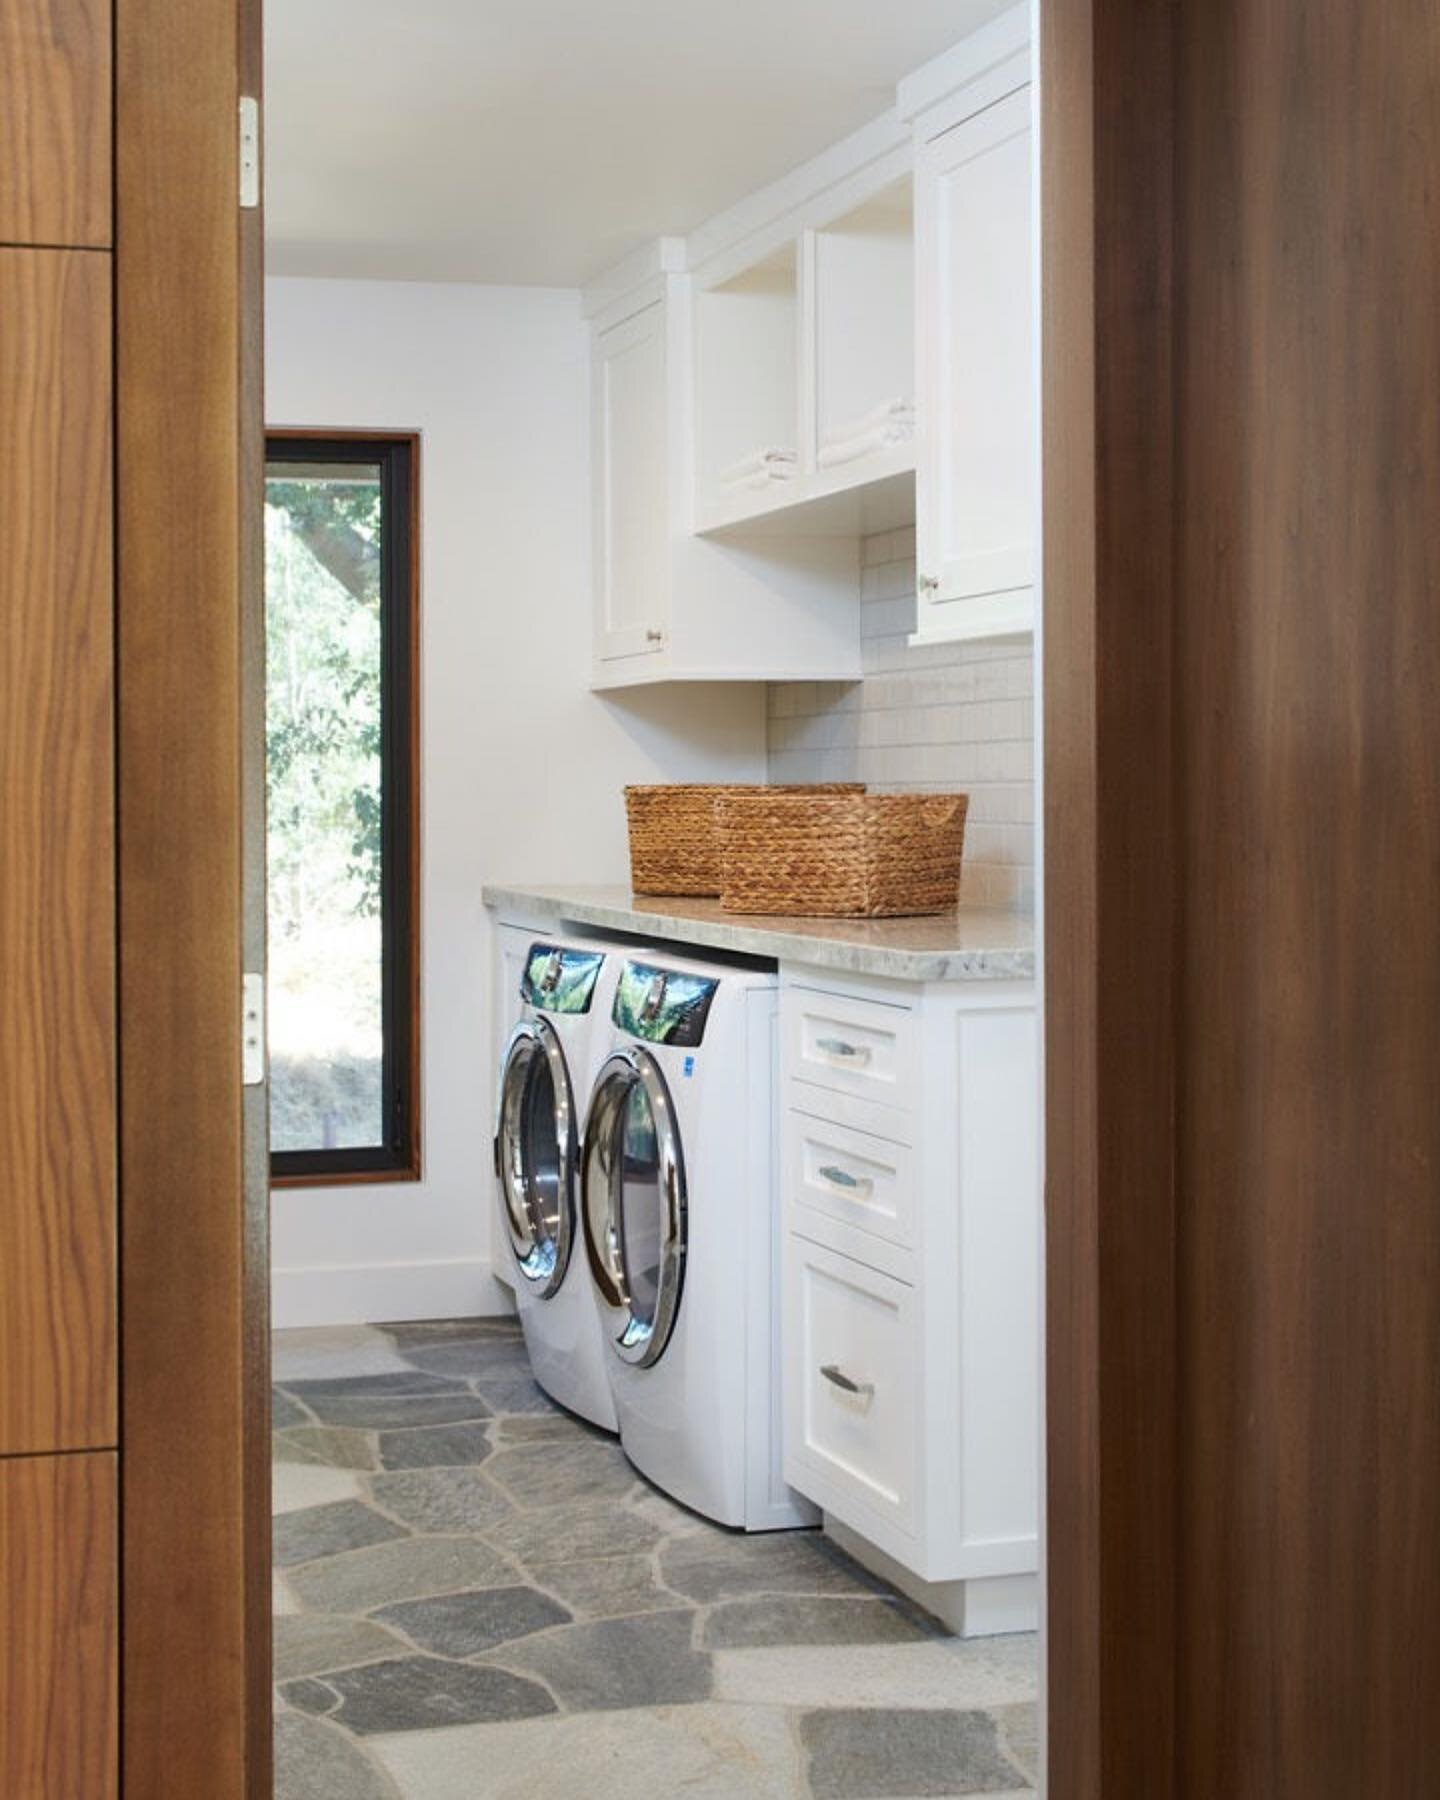 Peek into a serene laundry room with stone flooring, white cabinetry and a generous picture window looking out to the property&rsquo;s lush landscaping. 🌳 
📸: @pcv_ps 
#OnlyPrettyThings
#HomeWithStyle